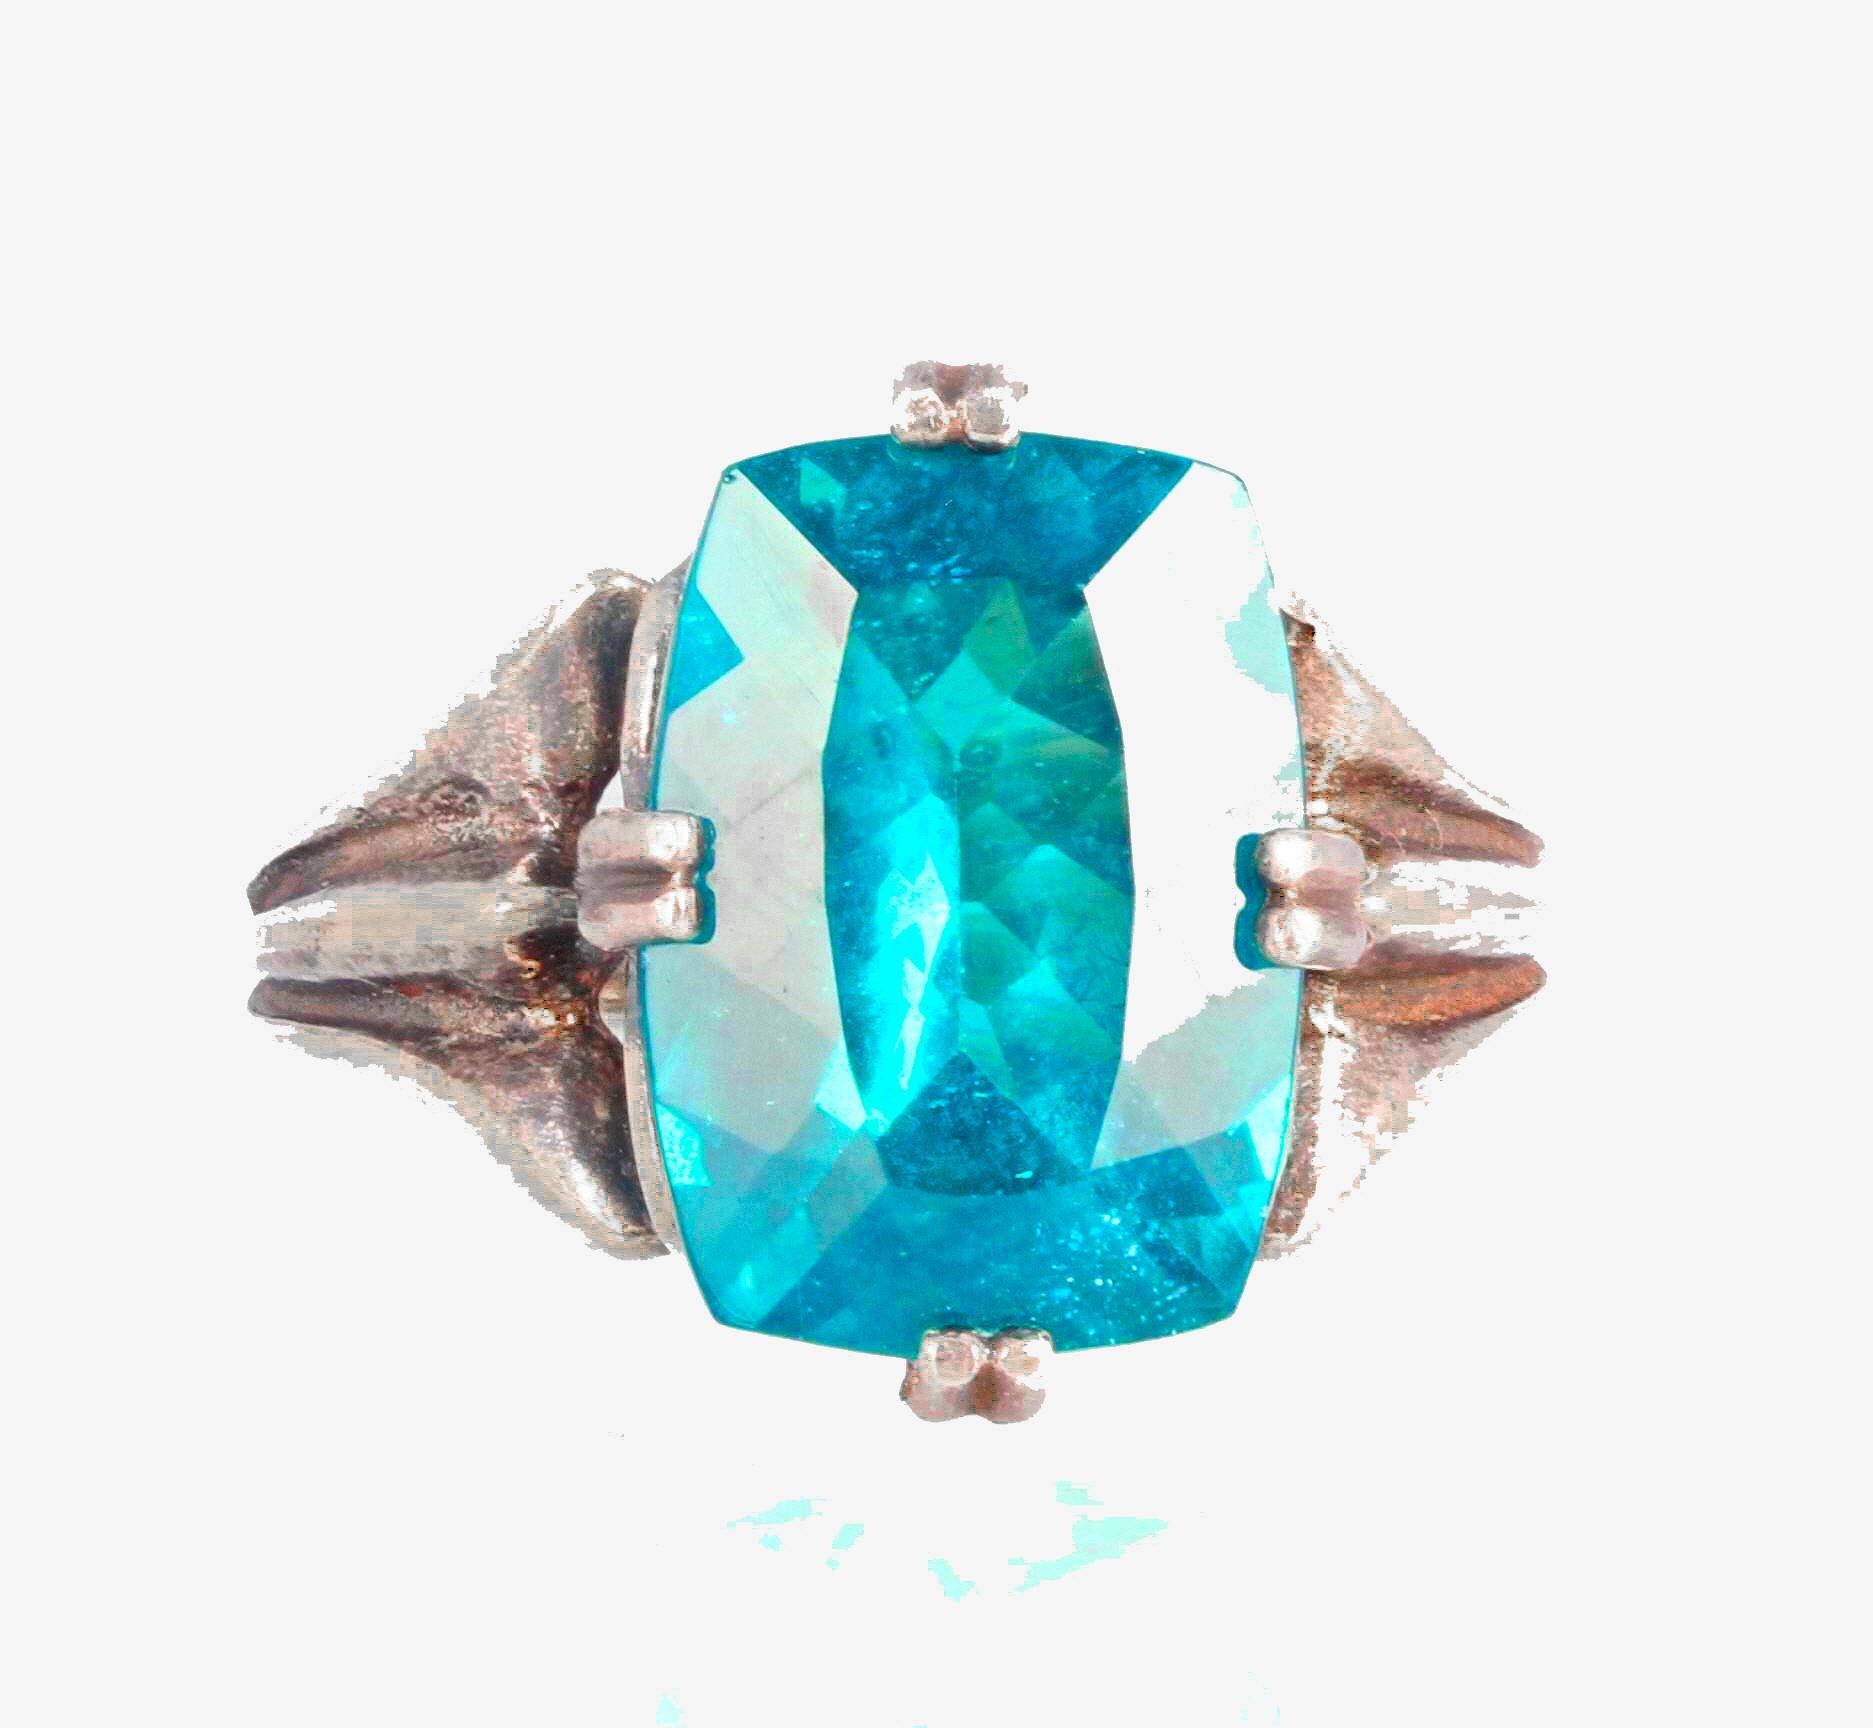 This glittering beautiful natural blue 6.4 carats natural unusually large Apatite (14mm x 10mm) is set in an interesting sterling silver ring size 7 (sizable for free).  This is the price of just the gemstone today.  As it copies the intense Paraiba